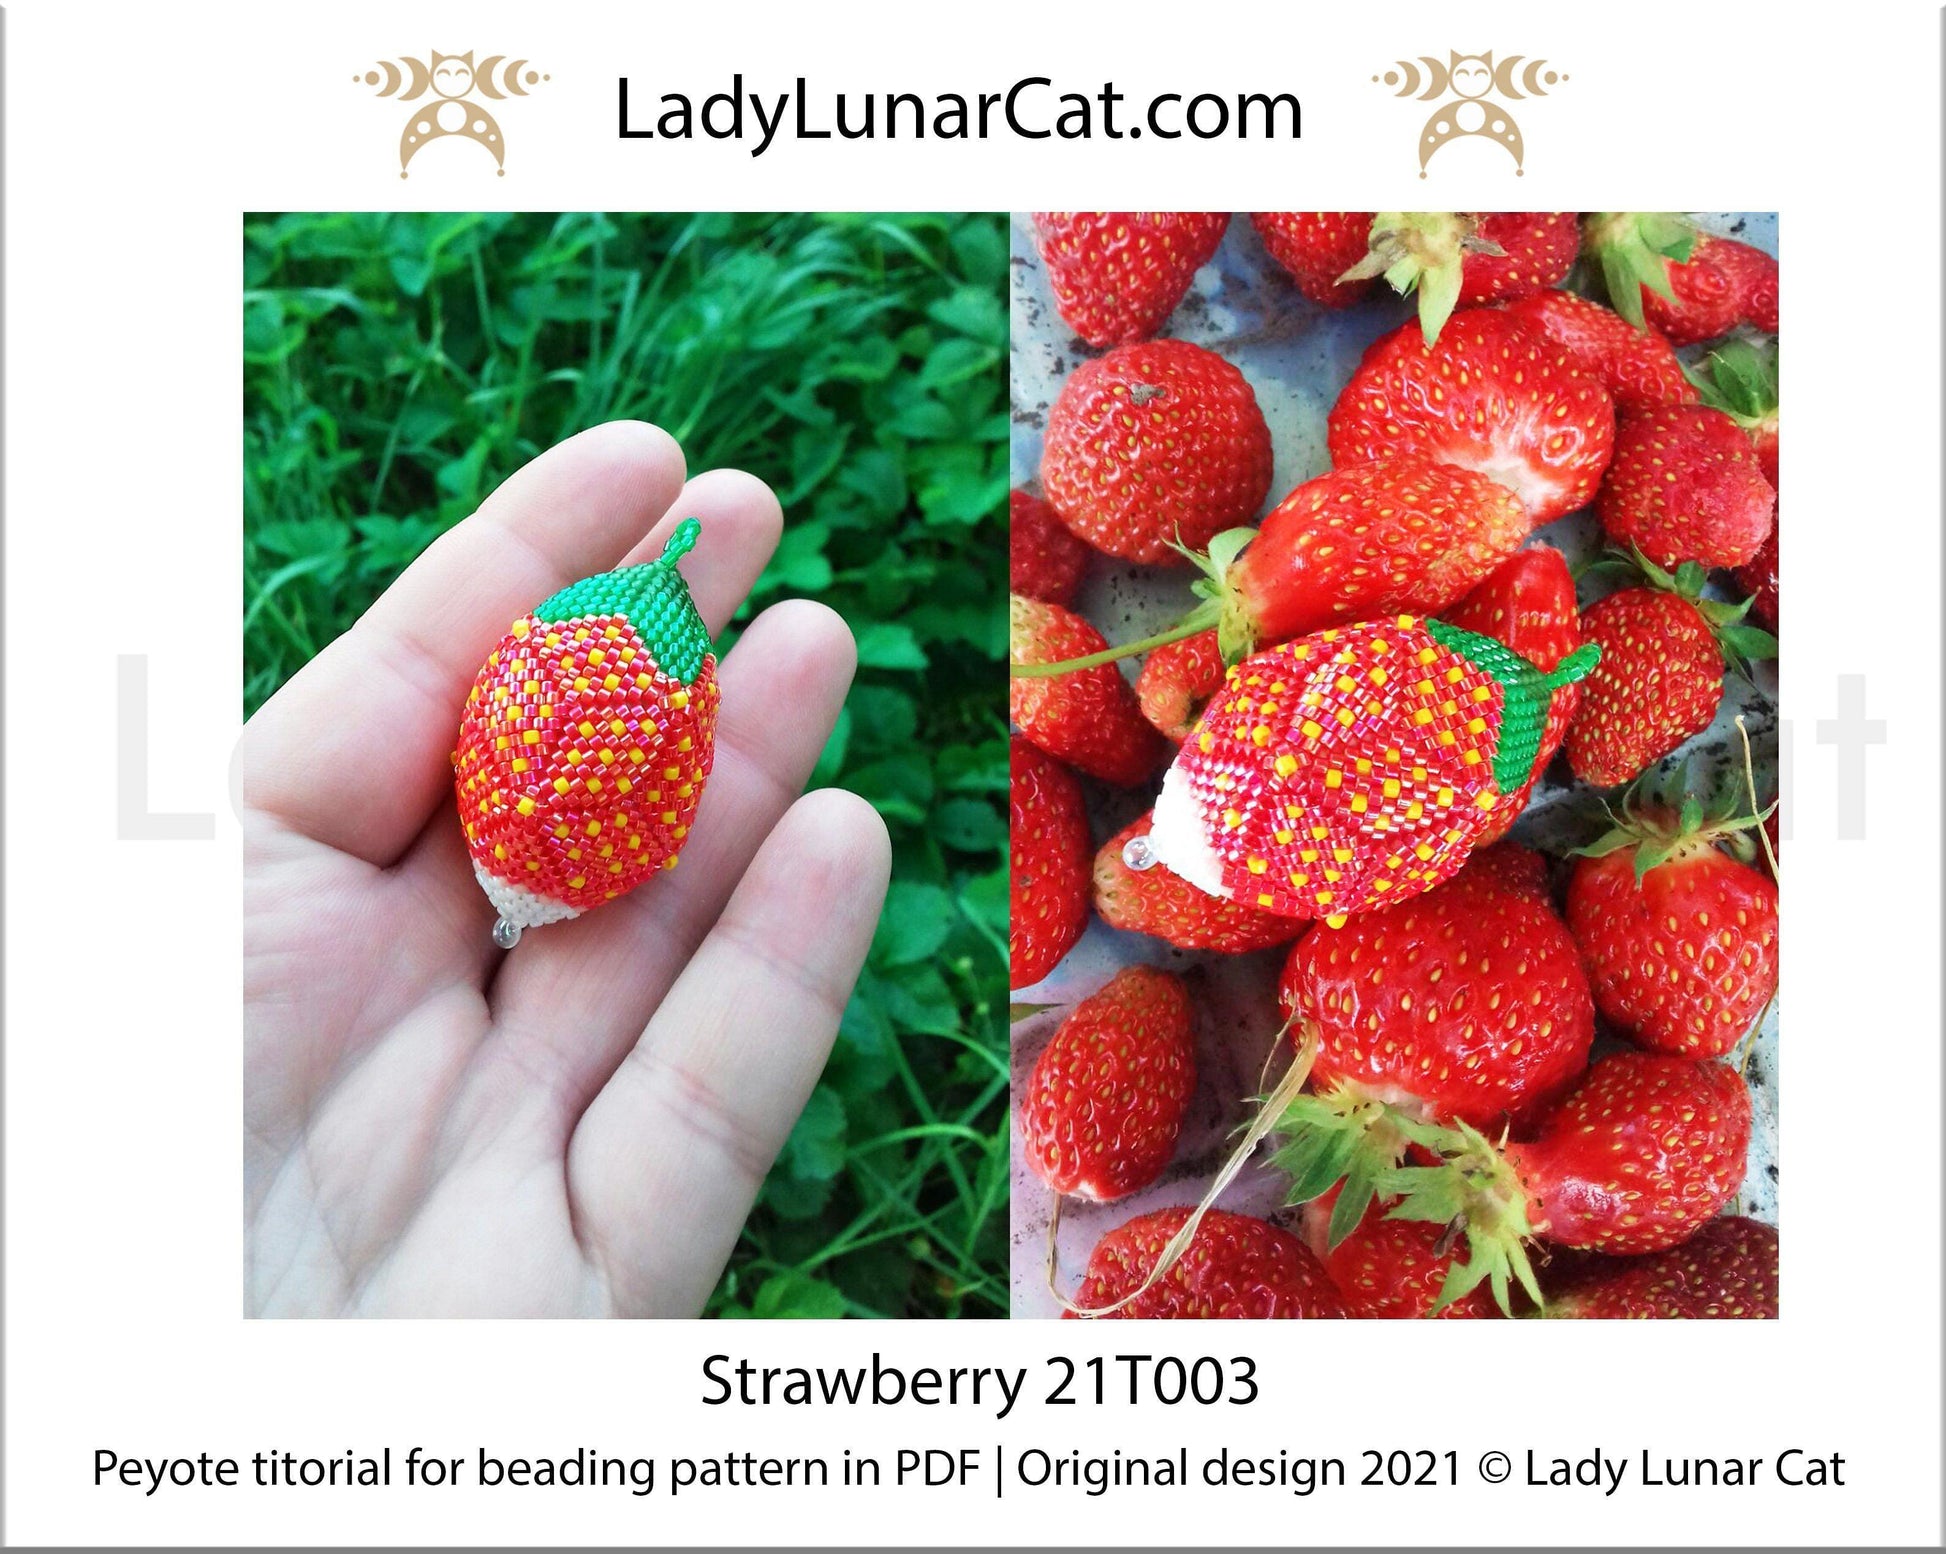 Beading tutorial Peyote egg or ball Strawberry 21T003 Step by step instruction LadyLunarCat